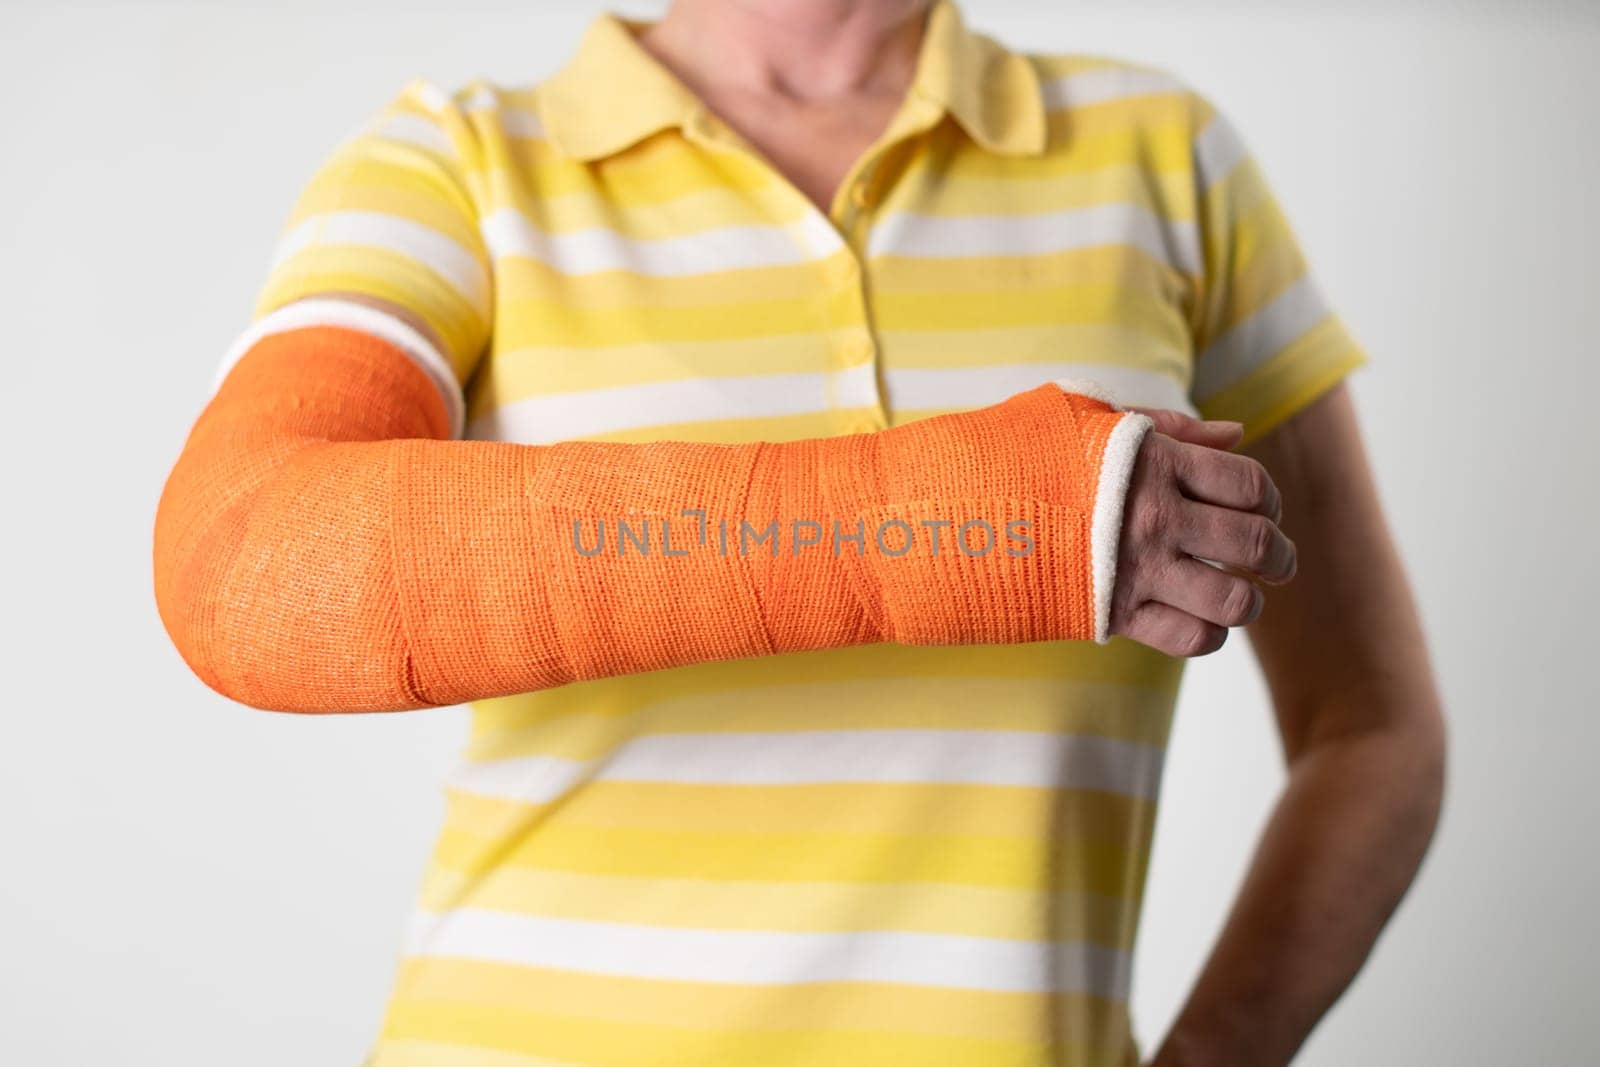 woman with a broken arm and an orange plaster plastic bandage on awhite background, modern materials for the treatment by KaterinaDalemans